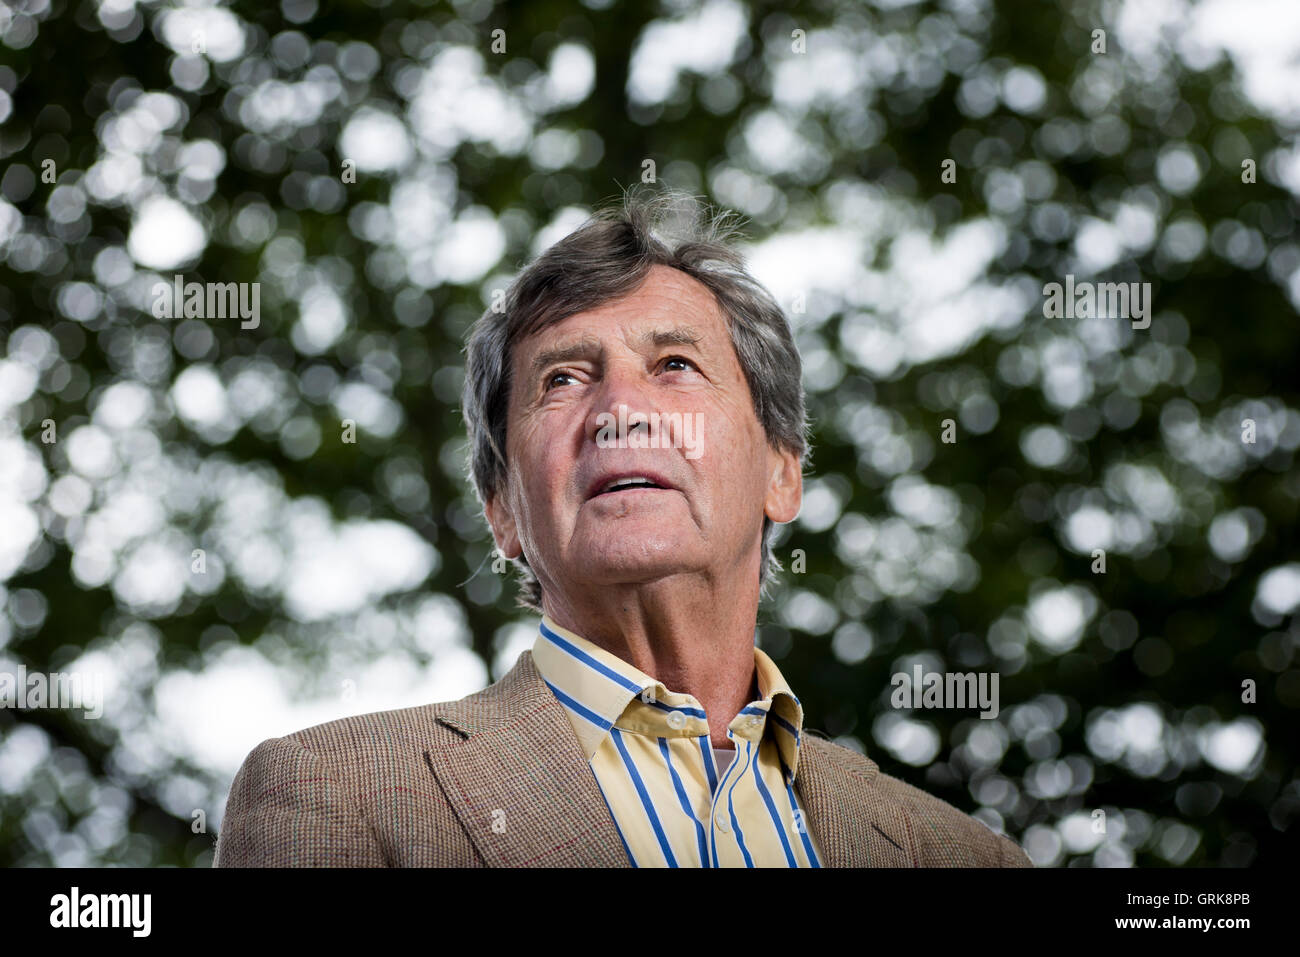 British broadcaster, author and parliamentarian Melvyn Bragg FRSL, FBA, FRS. Stock Photo